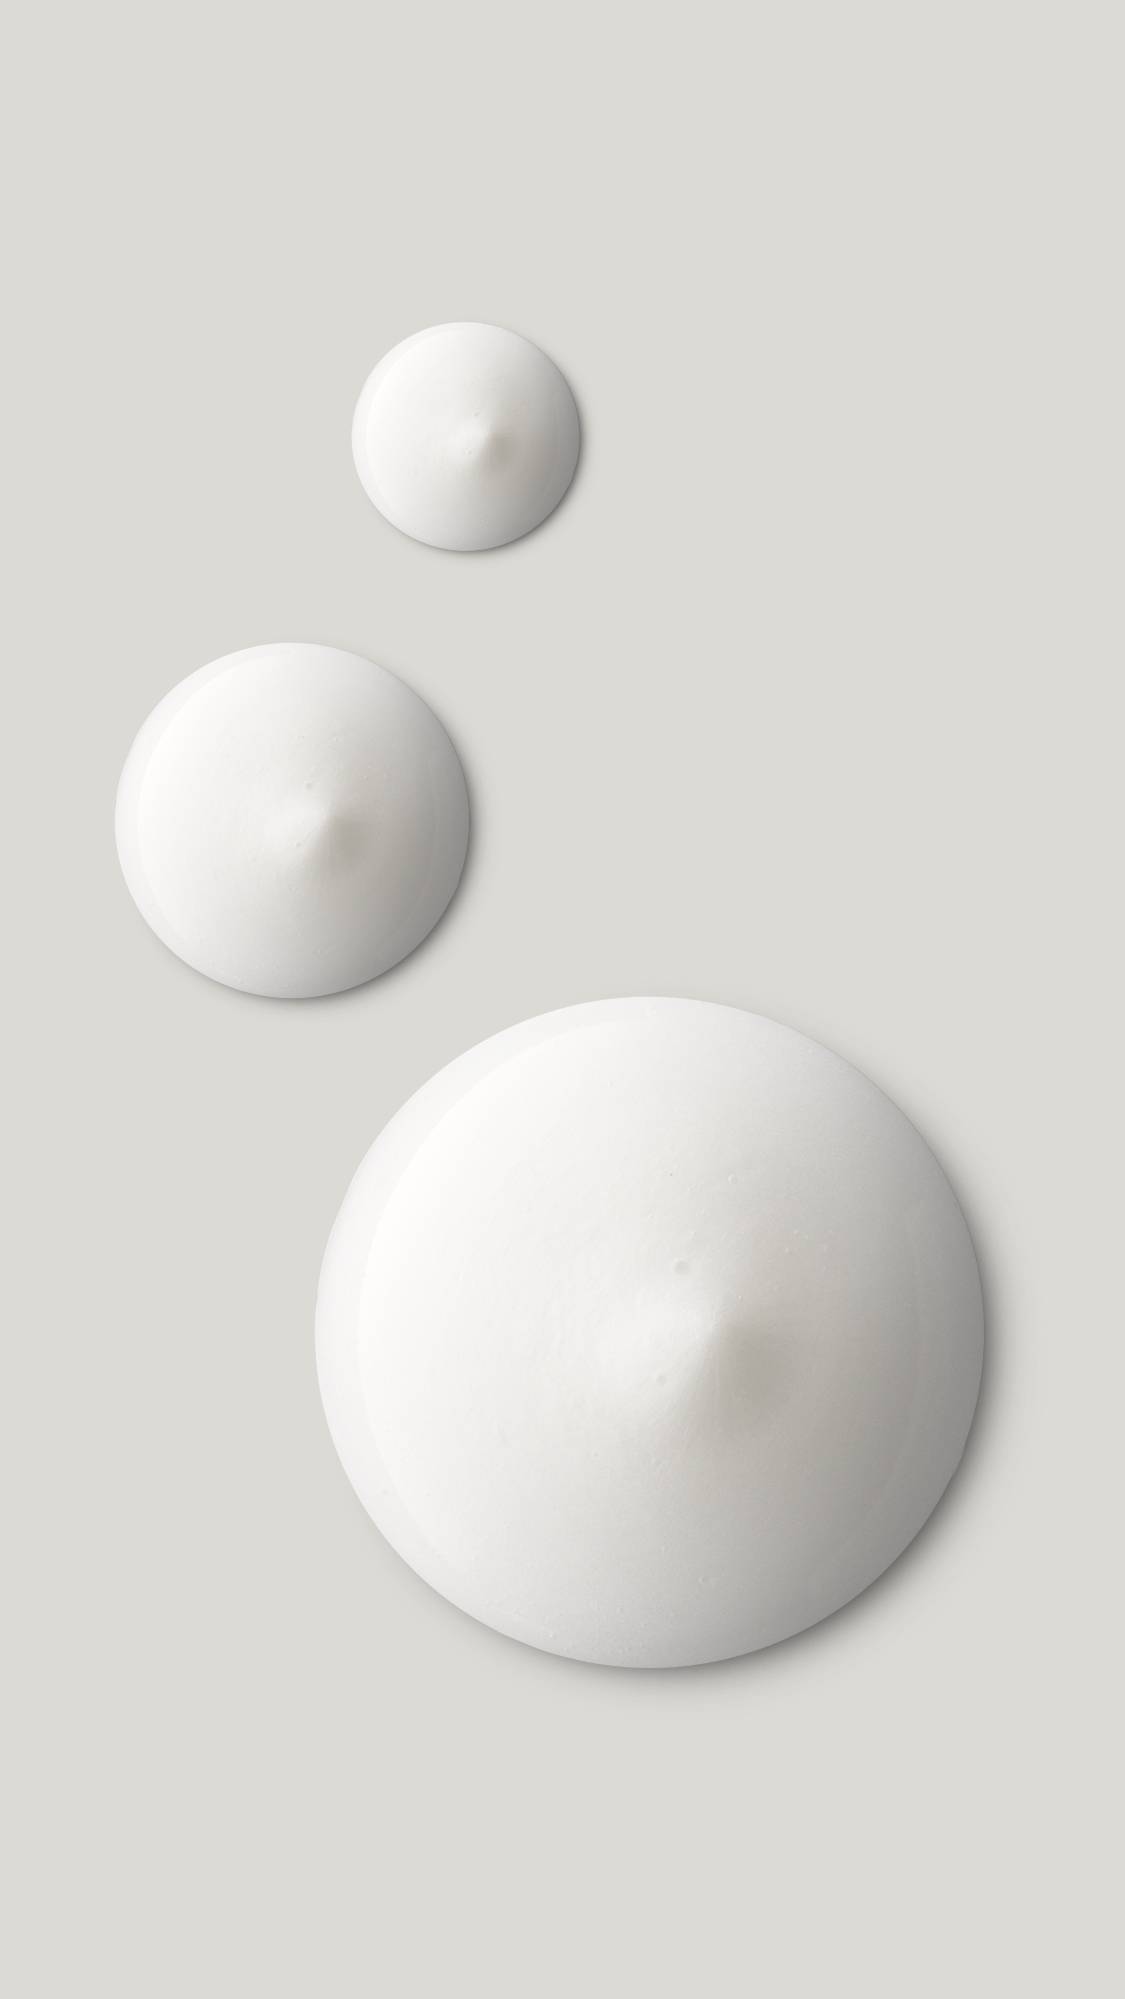 The image shows three circular product droplets getting larger. They are perfect circular swatches of bright white Enchanted eye cream. 